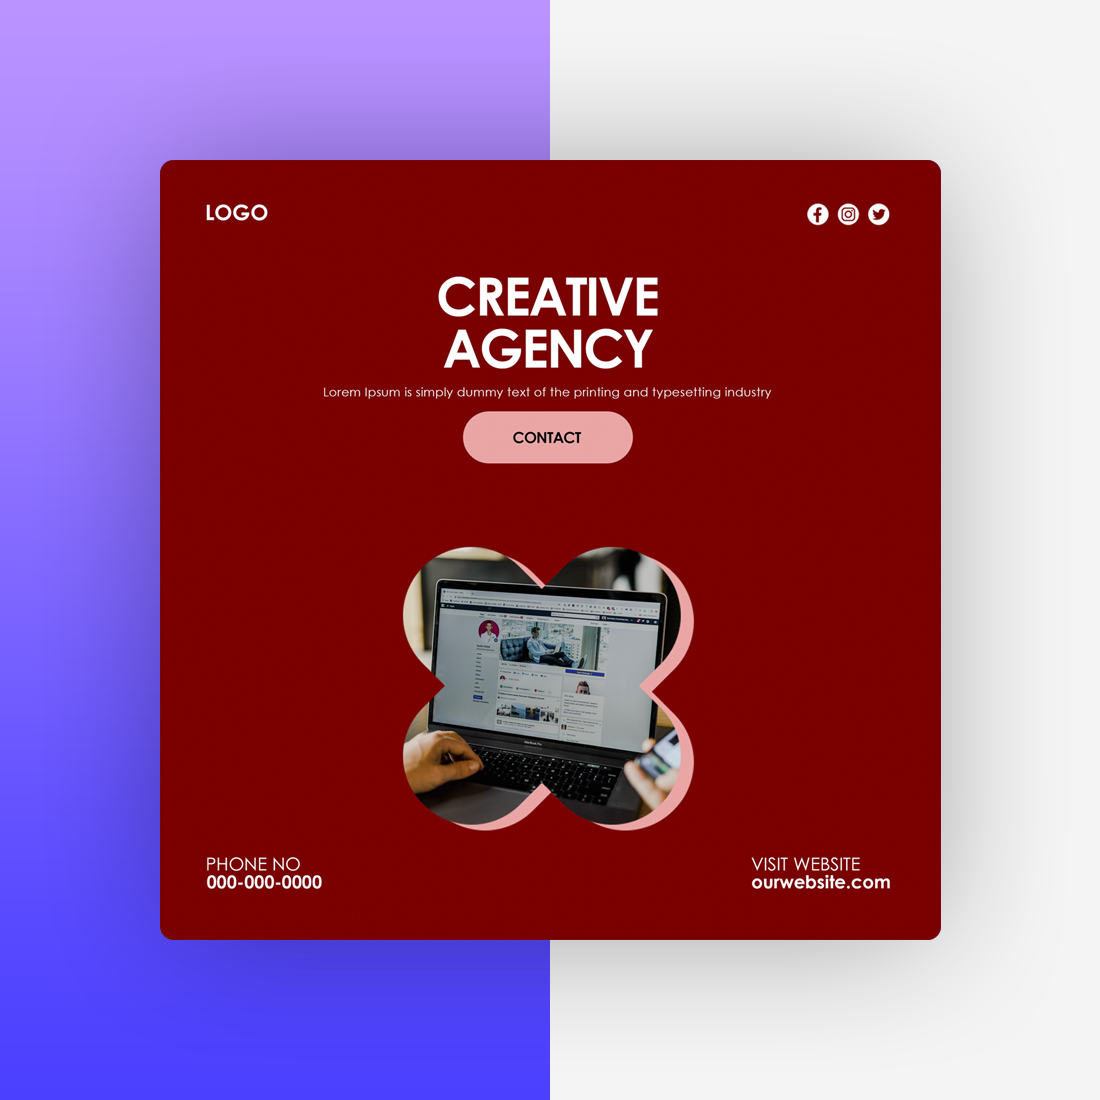 Creative Agency Poster Design Templates cover image.